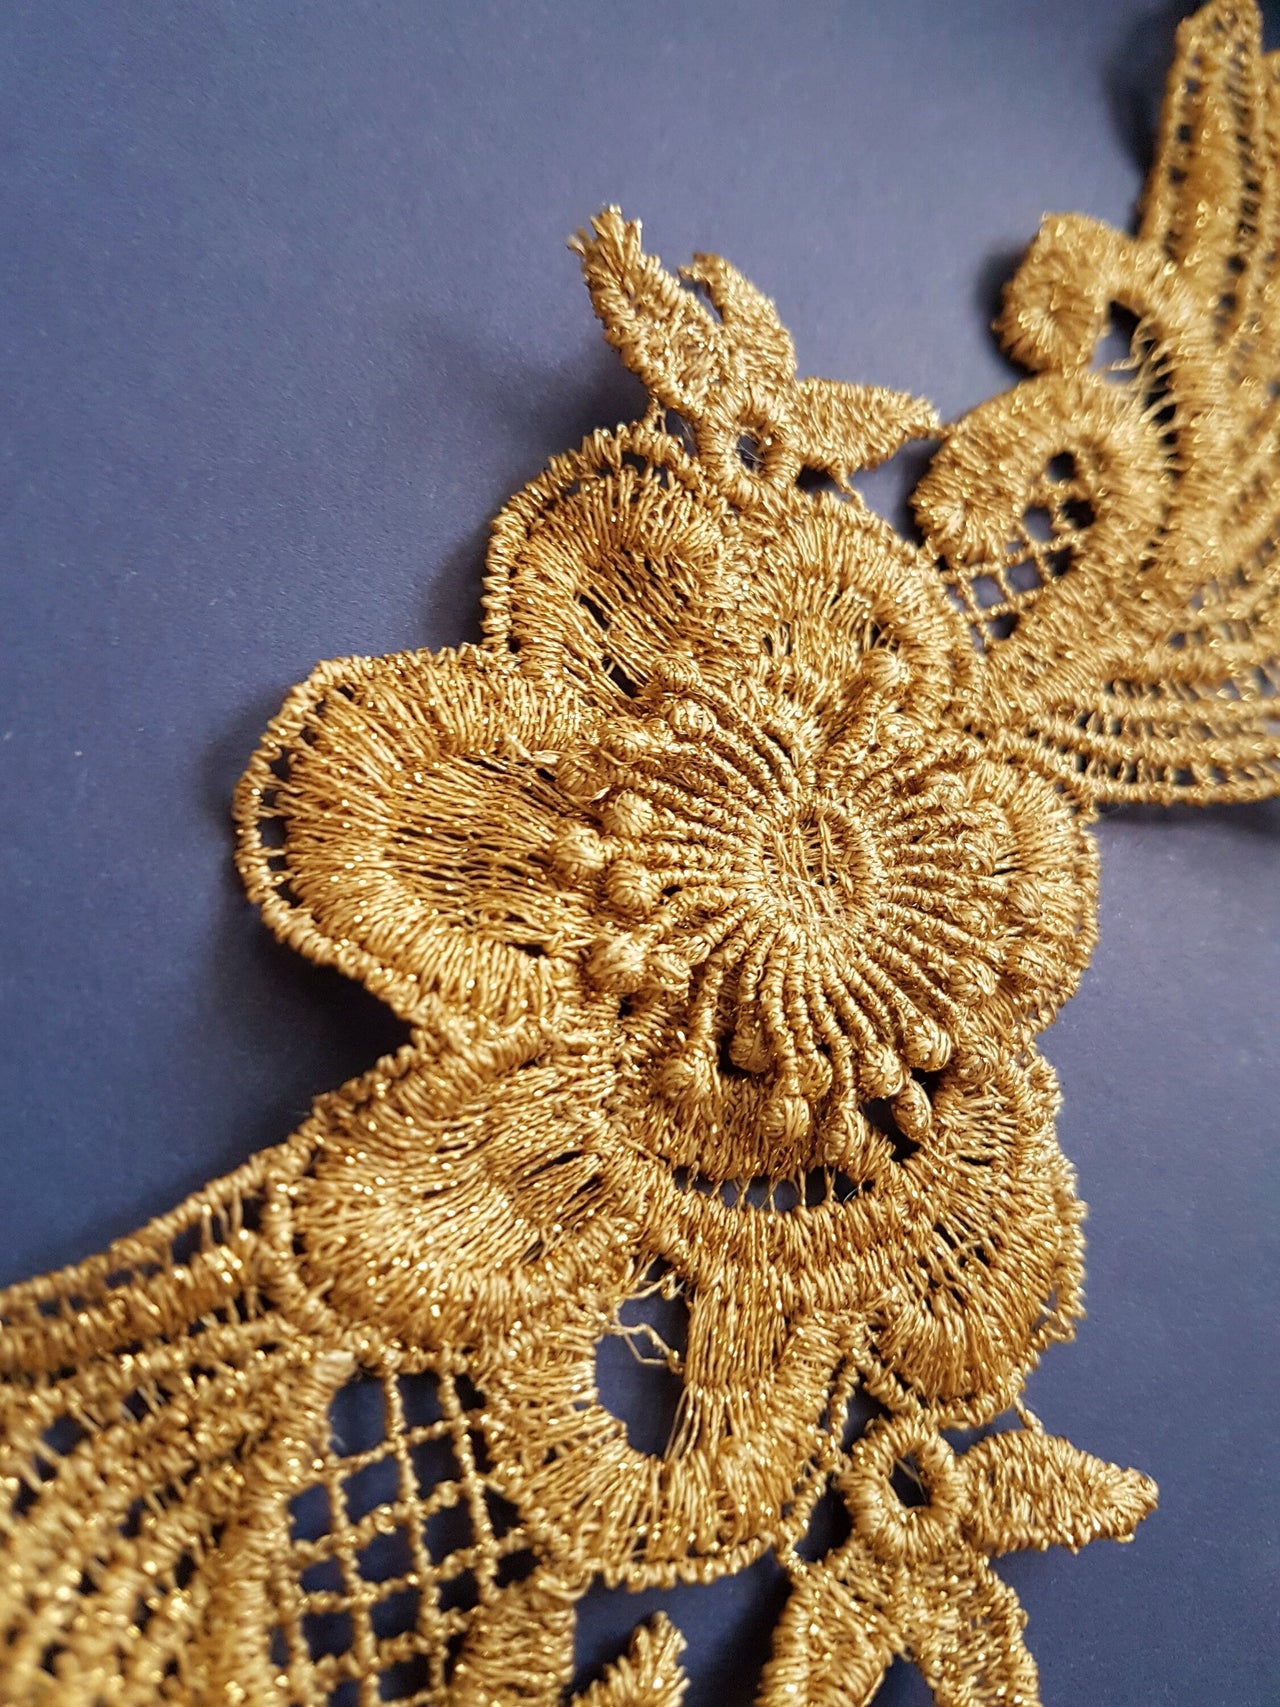 Antique Gold / Bronze Tone Crochet Thread Fabric Applique With Leaves and Flowers, Flower Applique - 200317A86